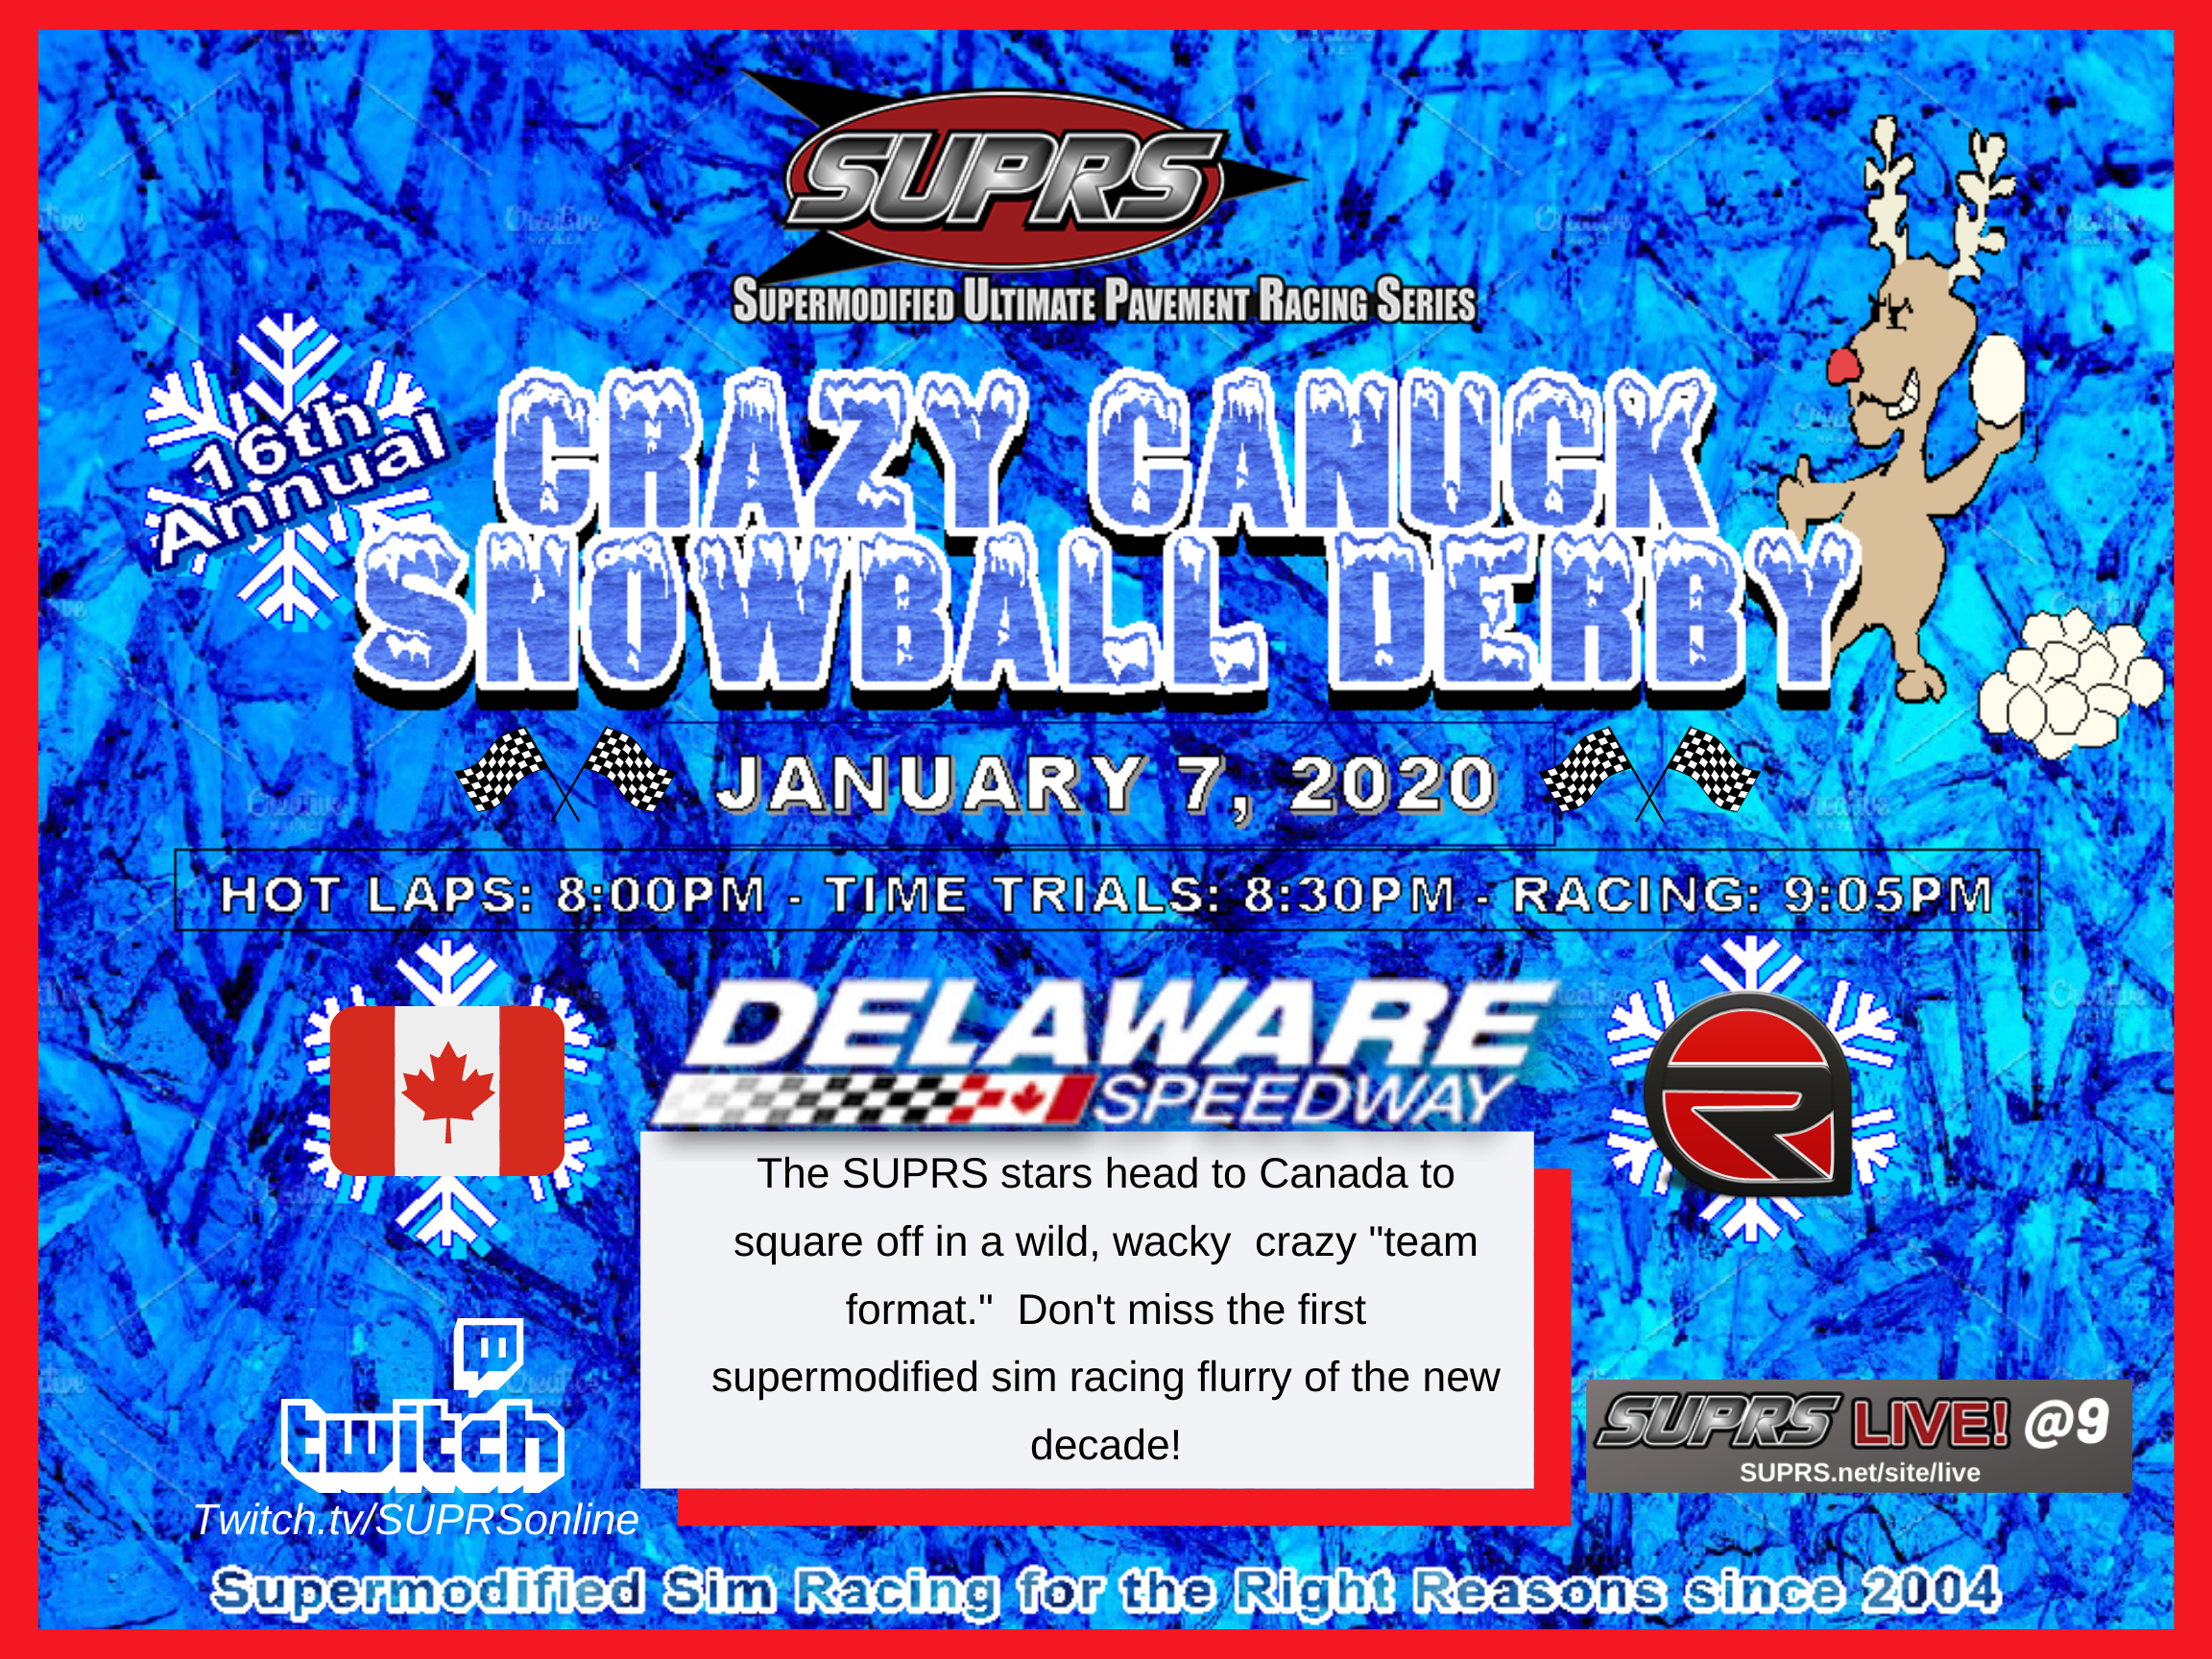 SUPRS 2020 Crazy Canuck Snowball Derby is the first race of the new decade and the first time SUPRS will race at Delaware Speedway.